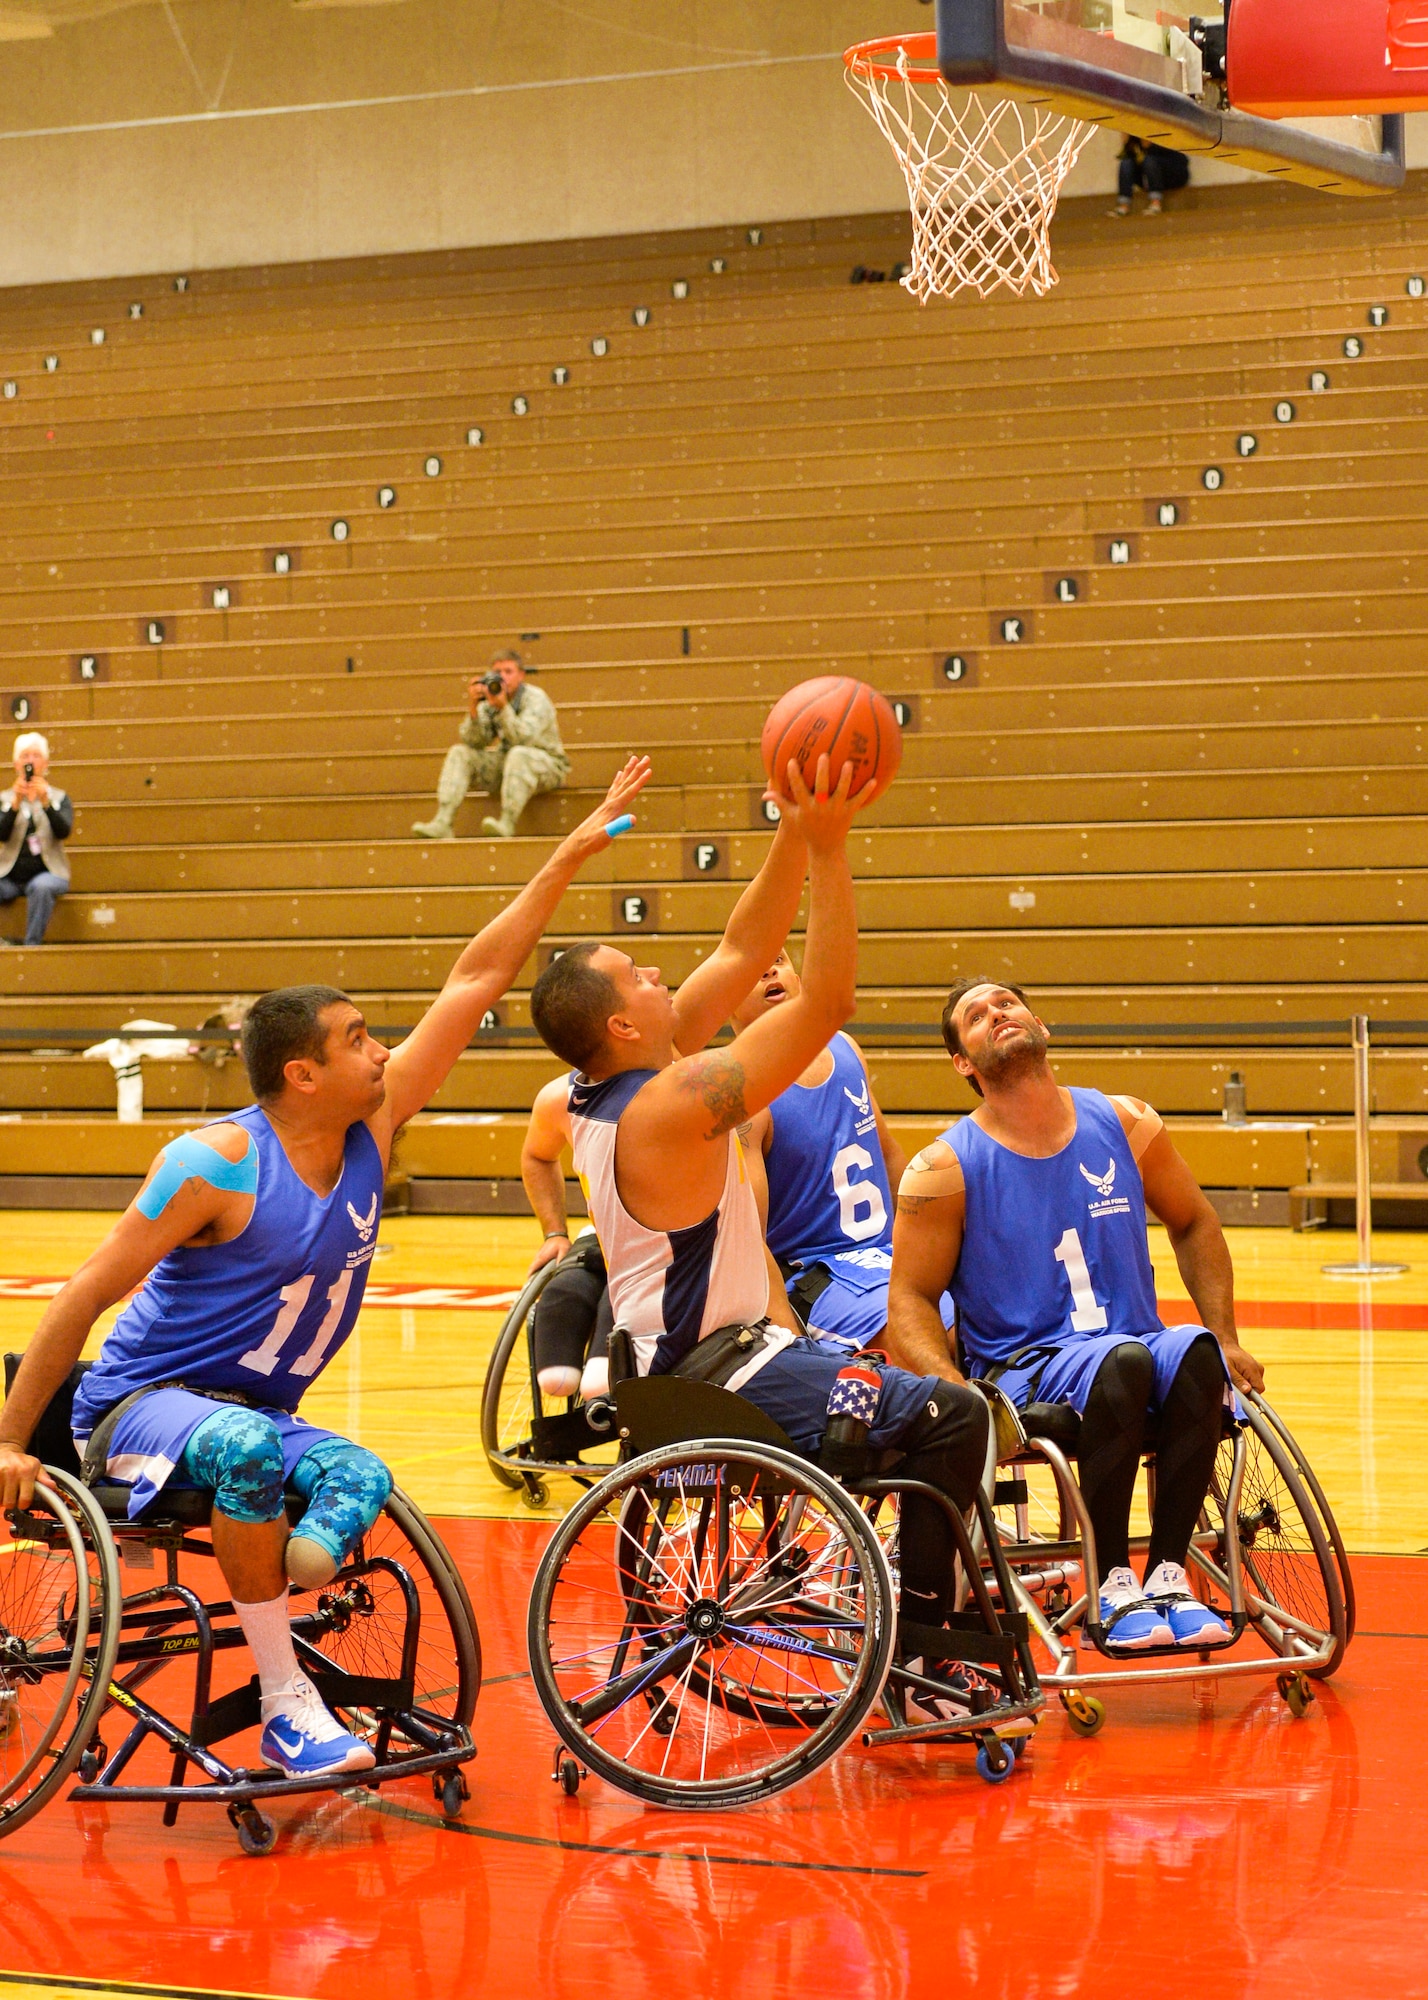 The Air Force and the Navy faced off in the first wheelchair basketball game of the 2014 Warrior Games Sept. 29, 2014, at the United States Olympic Training Center in Colorado Springs, Colo. The Navy won 38-19 and will face the Army in the next round. (U.S Air Force photo/Staff Sgt. Devon Suits)